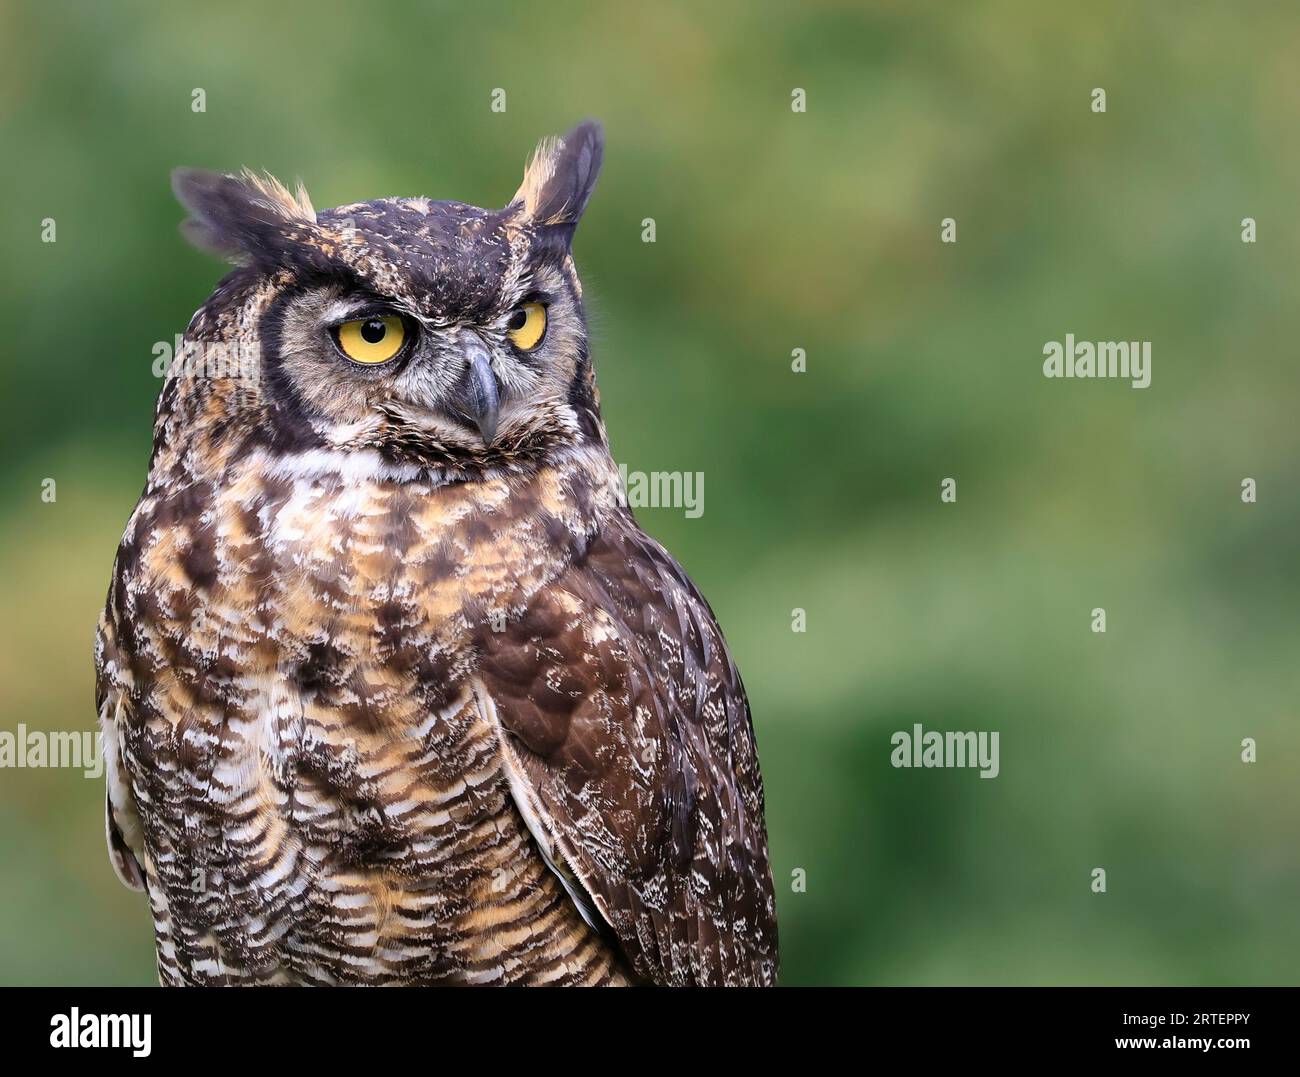 Great-horned Owl portrait isolated on green background, Quebec, Canada Stock Photo